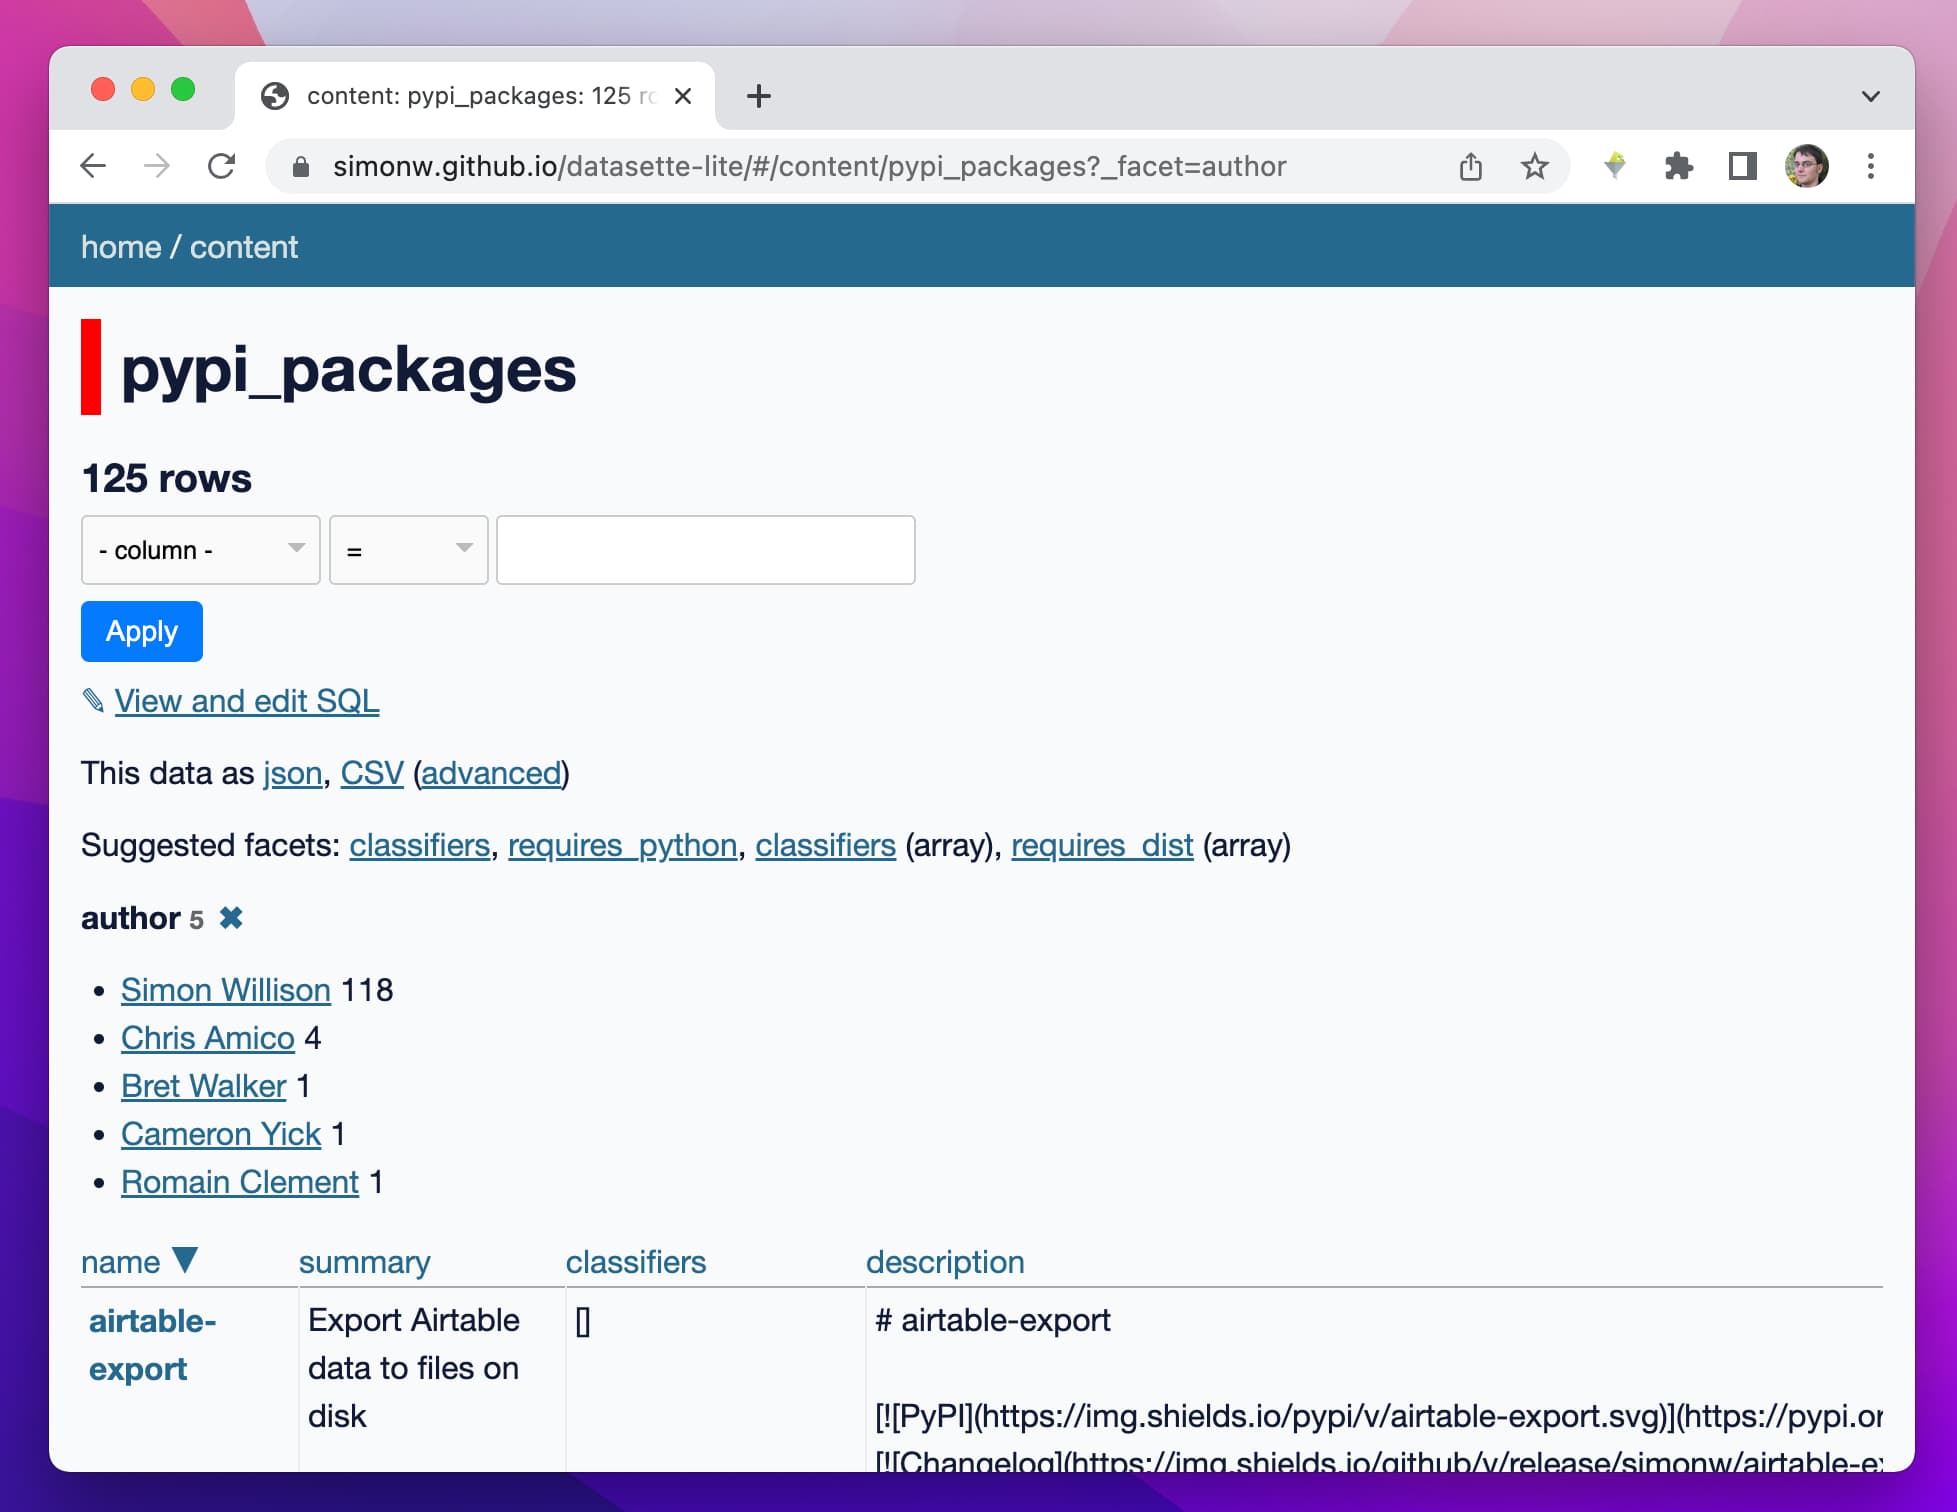 A screenshot of the pypi_packages database table running in Google Chrome in a page with the URL of simonw.github.io/datasette-lite/#/content/pypi_packages?_facet=author